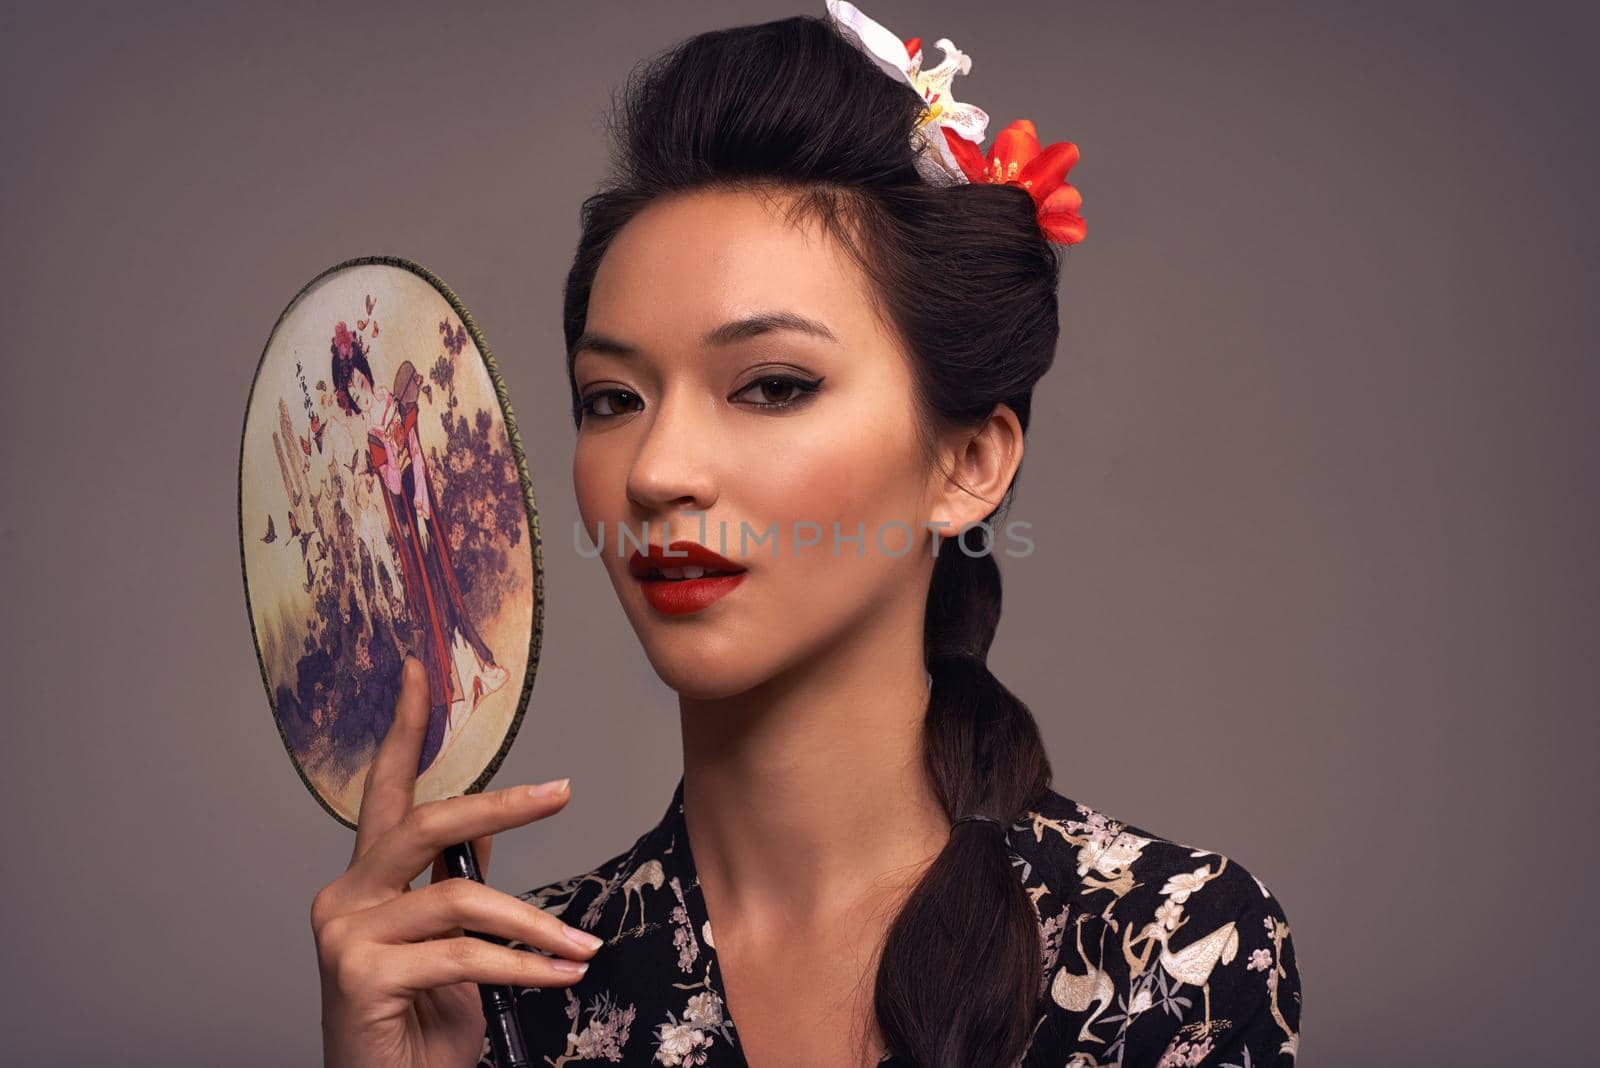 Getting back to my roots. Studio shot of an attractive young woman dressed in traditional asian clothing